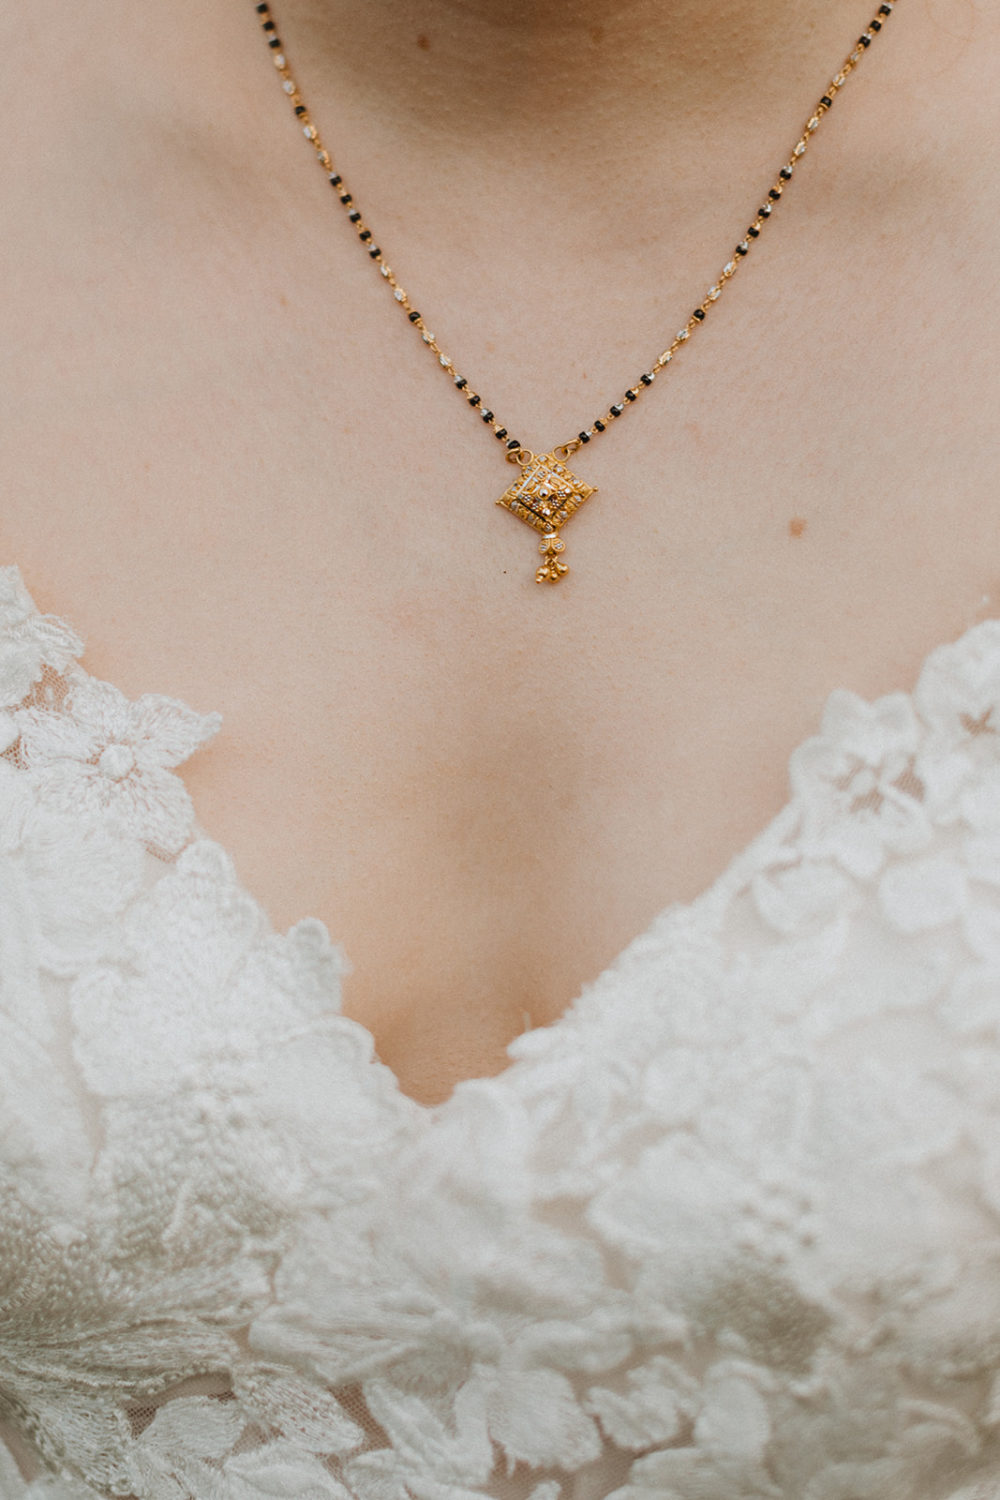 bride wears gifted wedding necklace as part of hindu wedding traditions